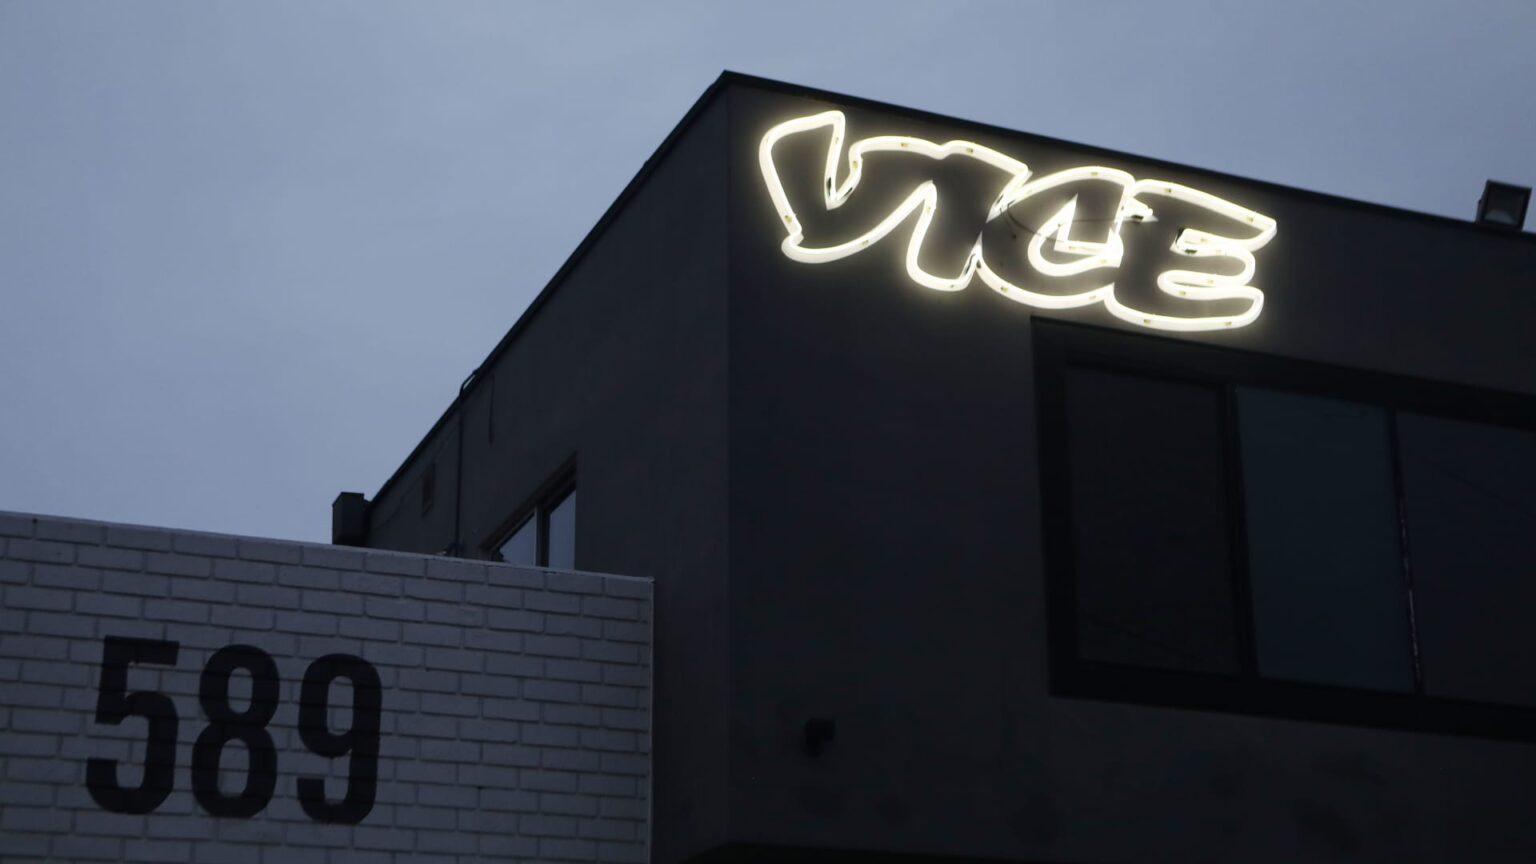 Vice Media is filing for bankruptcy to allow sale